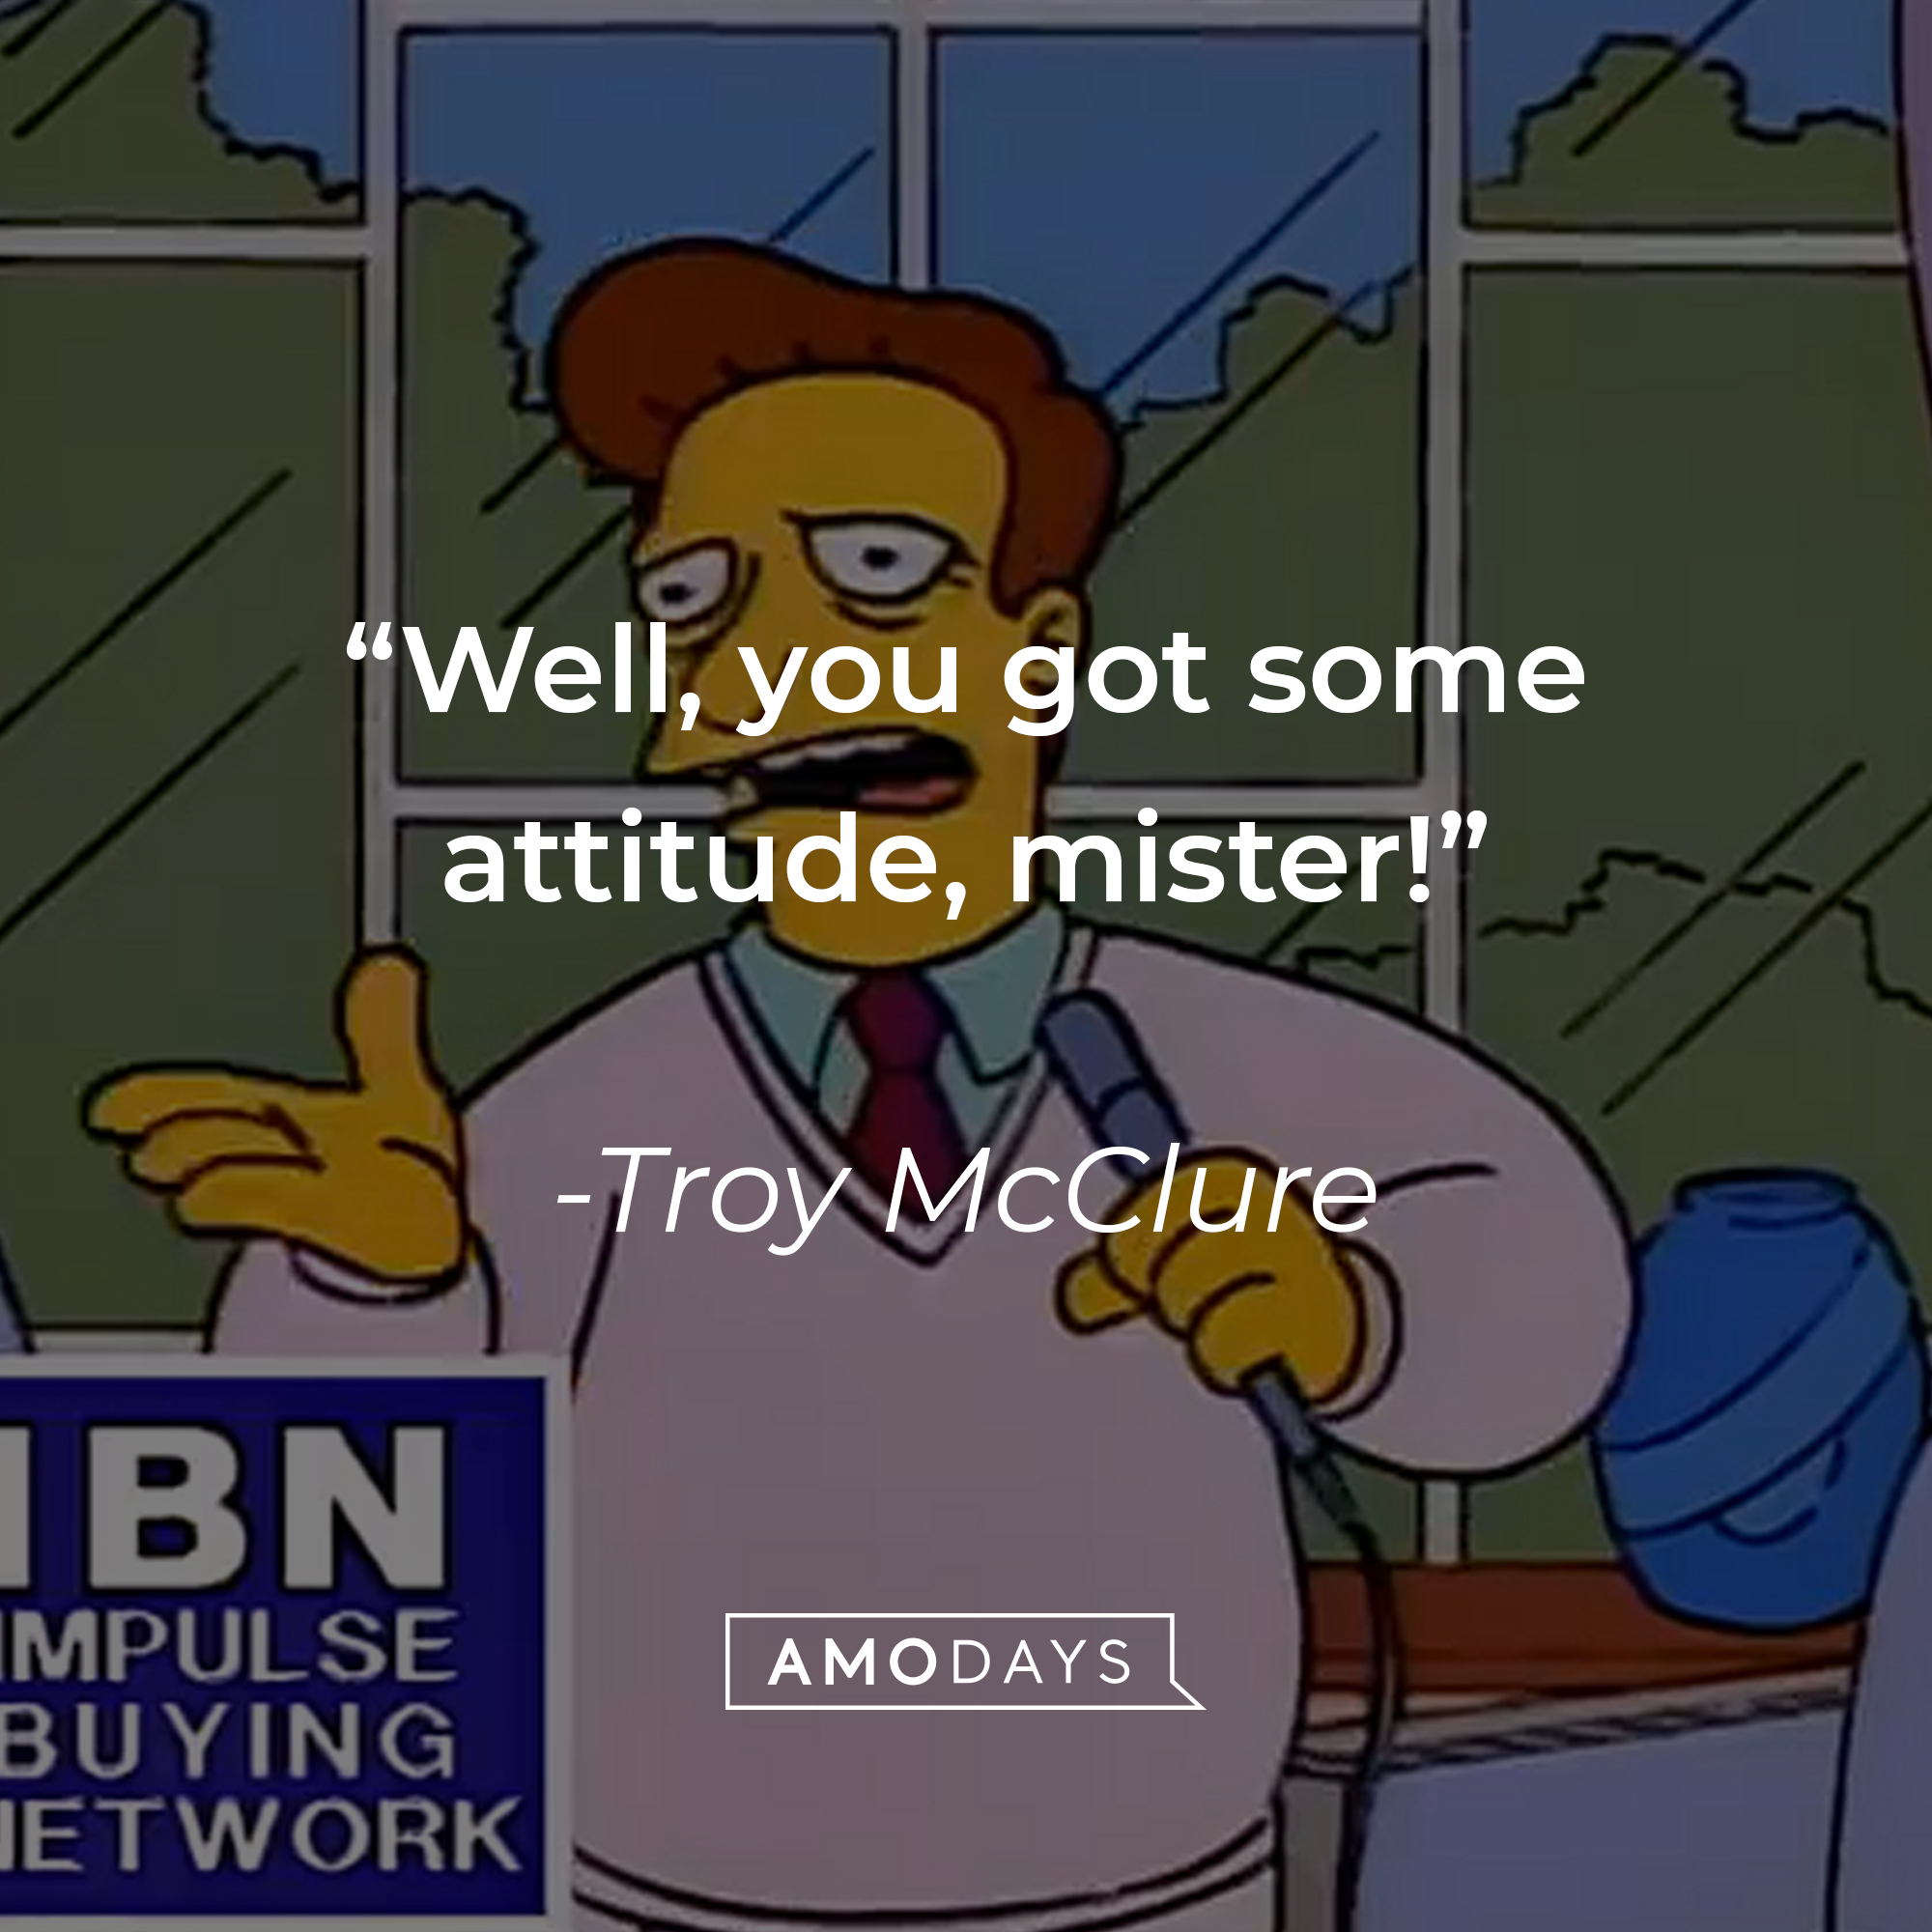 Troy McClure, with his quote: “Well, you got some attitude, mister!” | Source: facebook.com/TheSimpsons